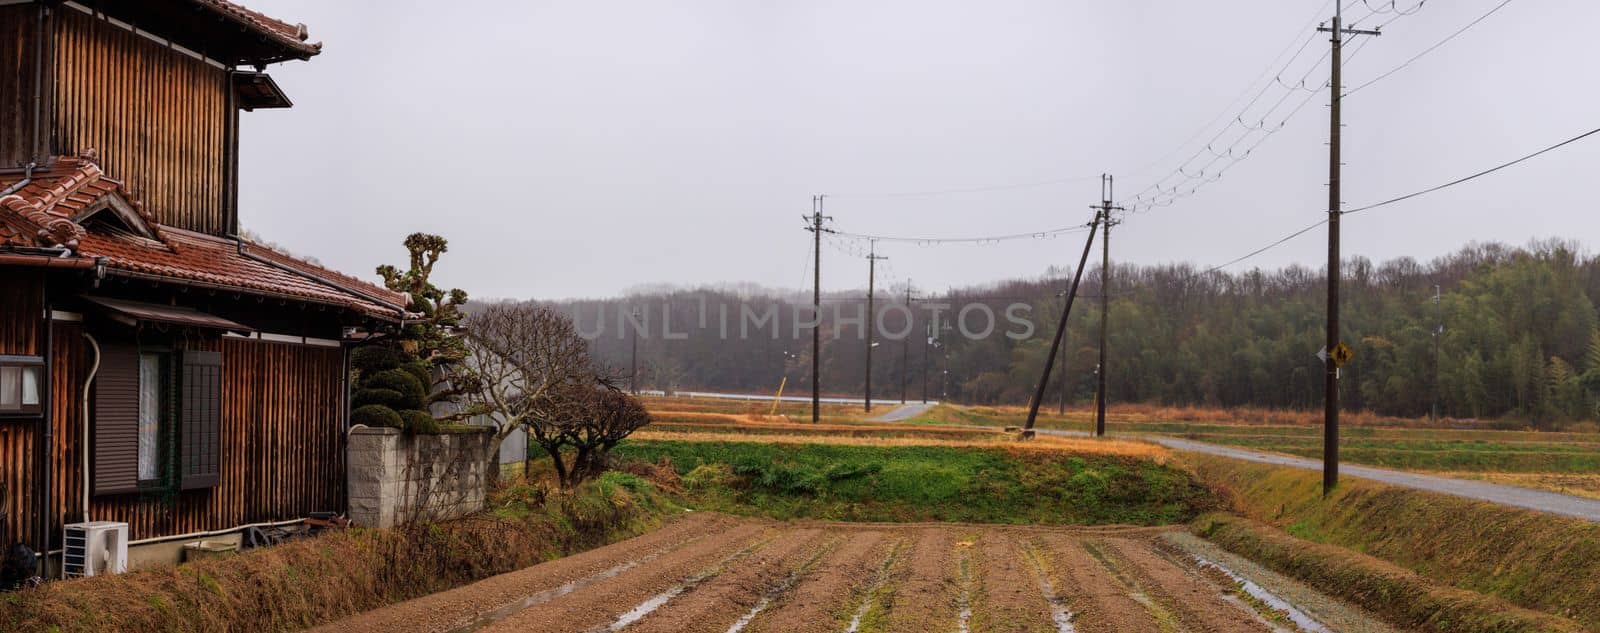 Old Wooden Japanese House by Small Rice Field and Country Road on Cloudy Day. High quality photo